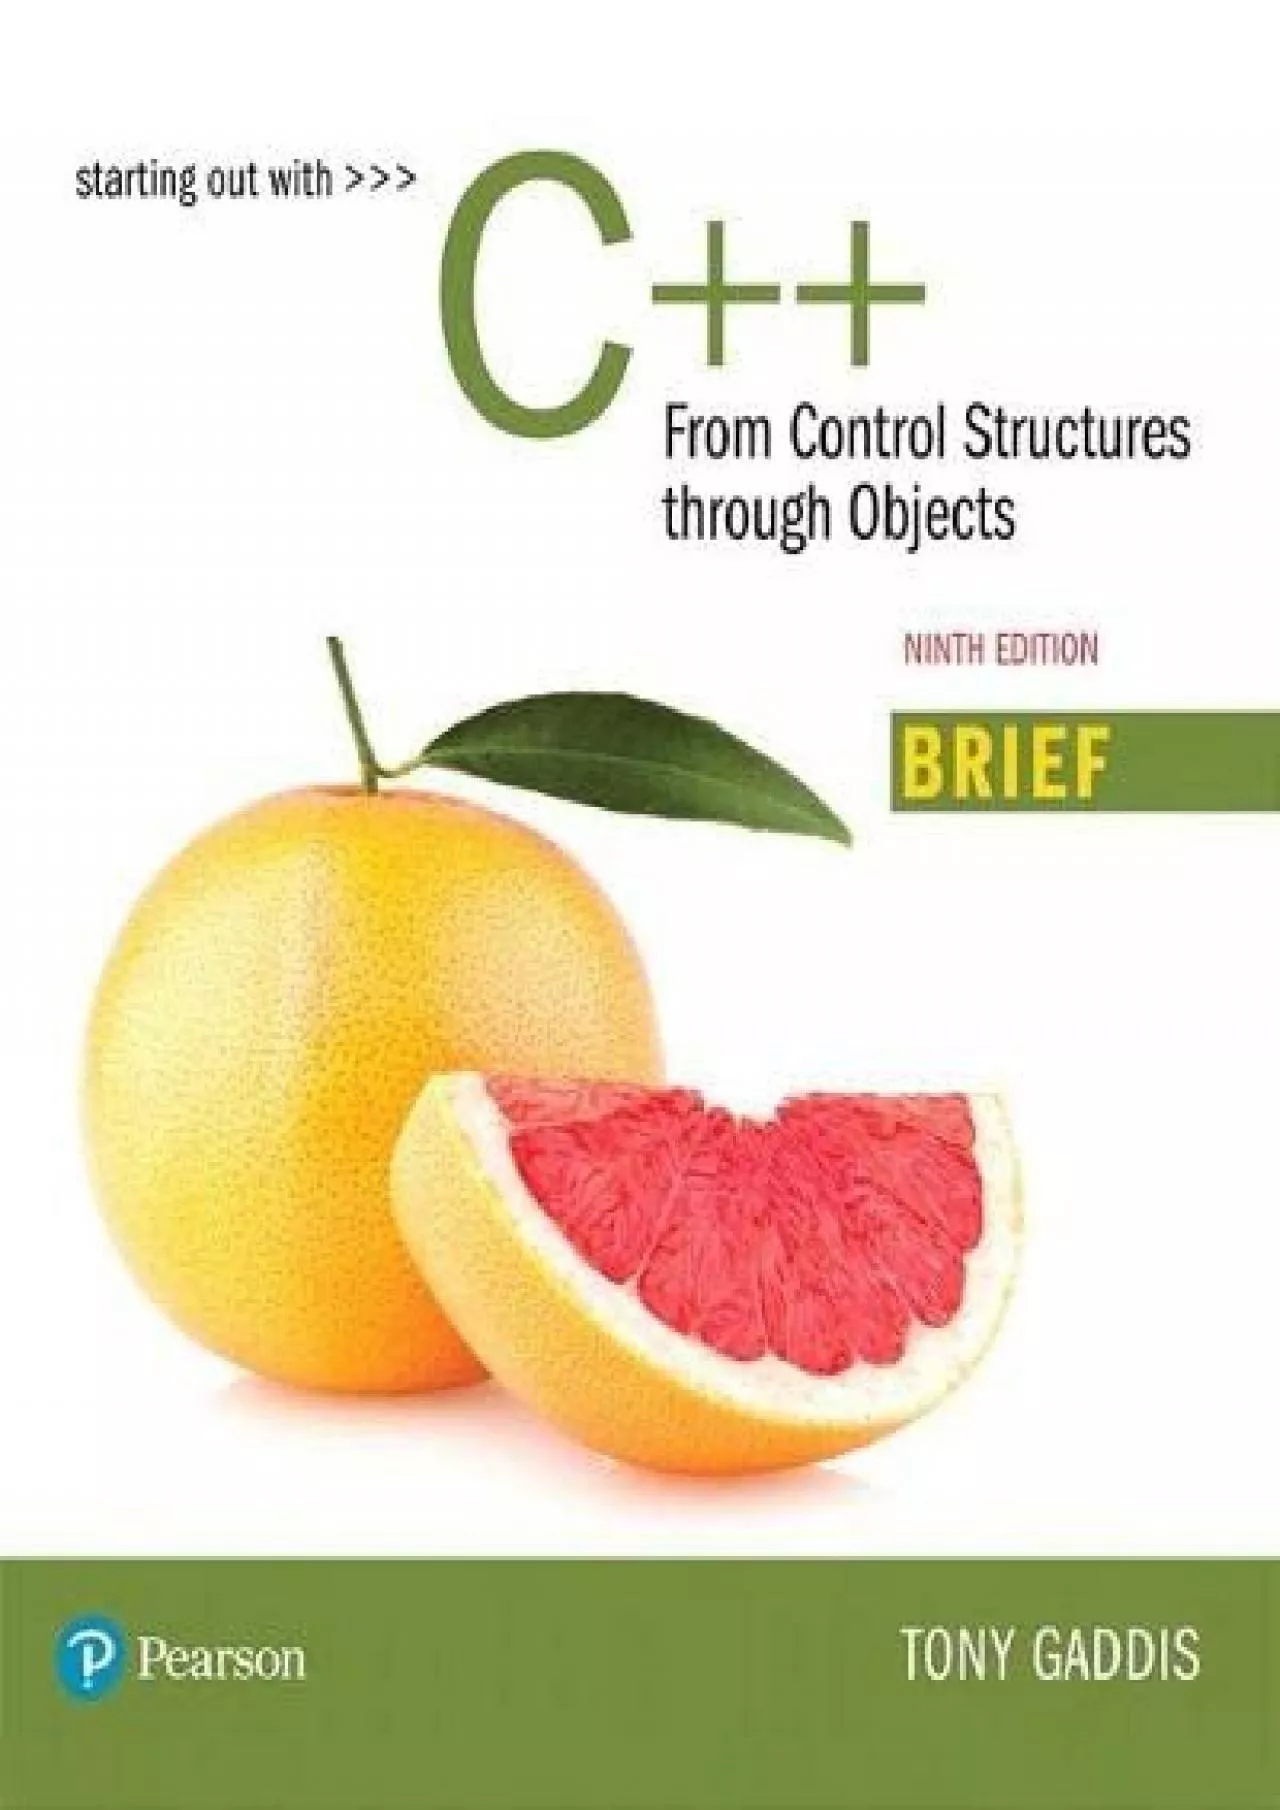 [BEST]-Starting Out with C++: From Control Structures through Objects, Brief Version (What\'s